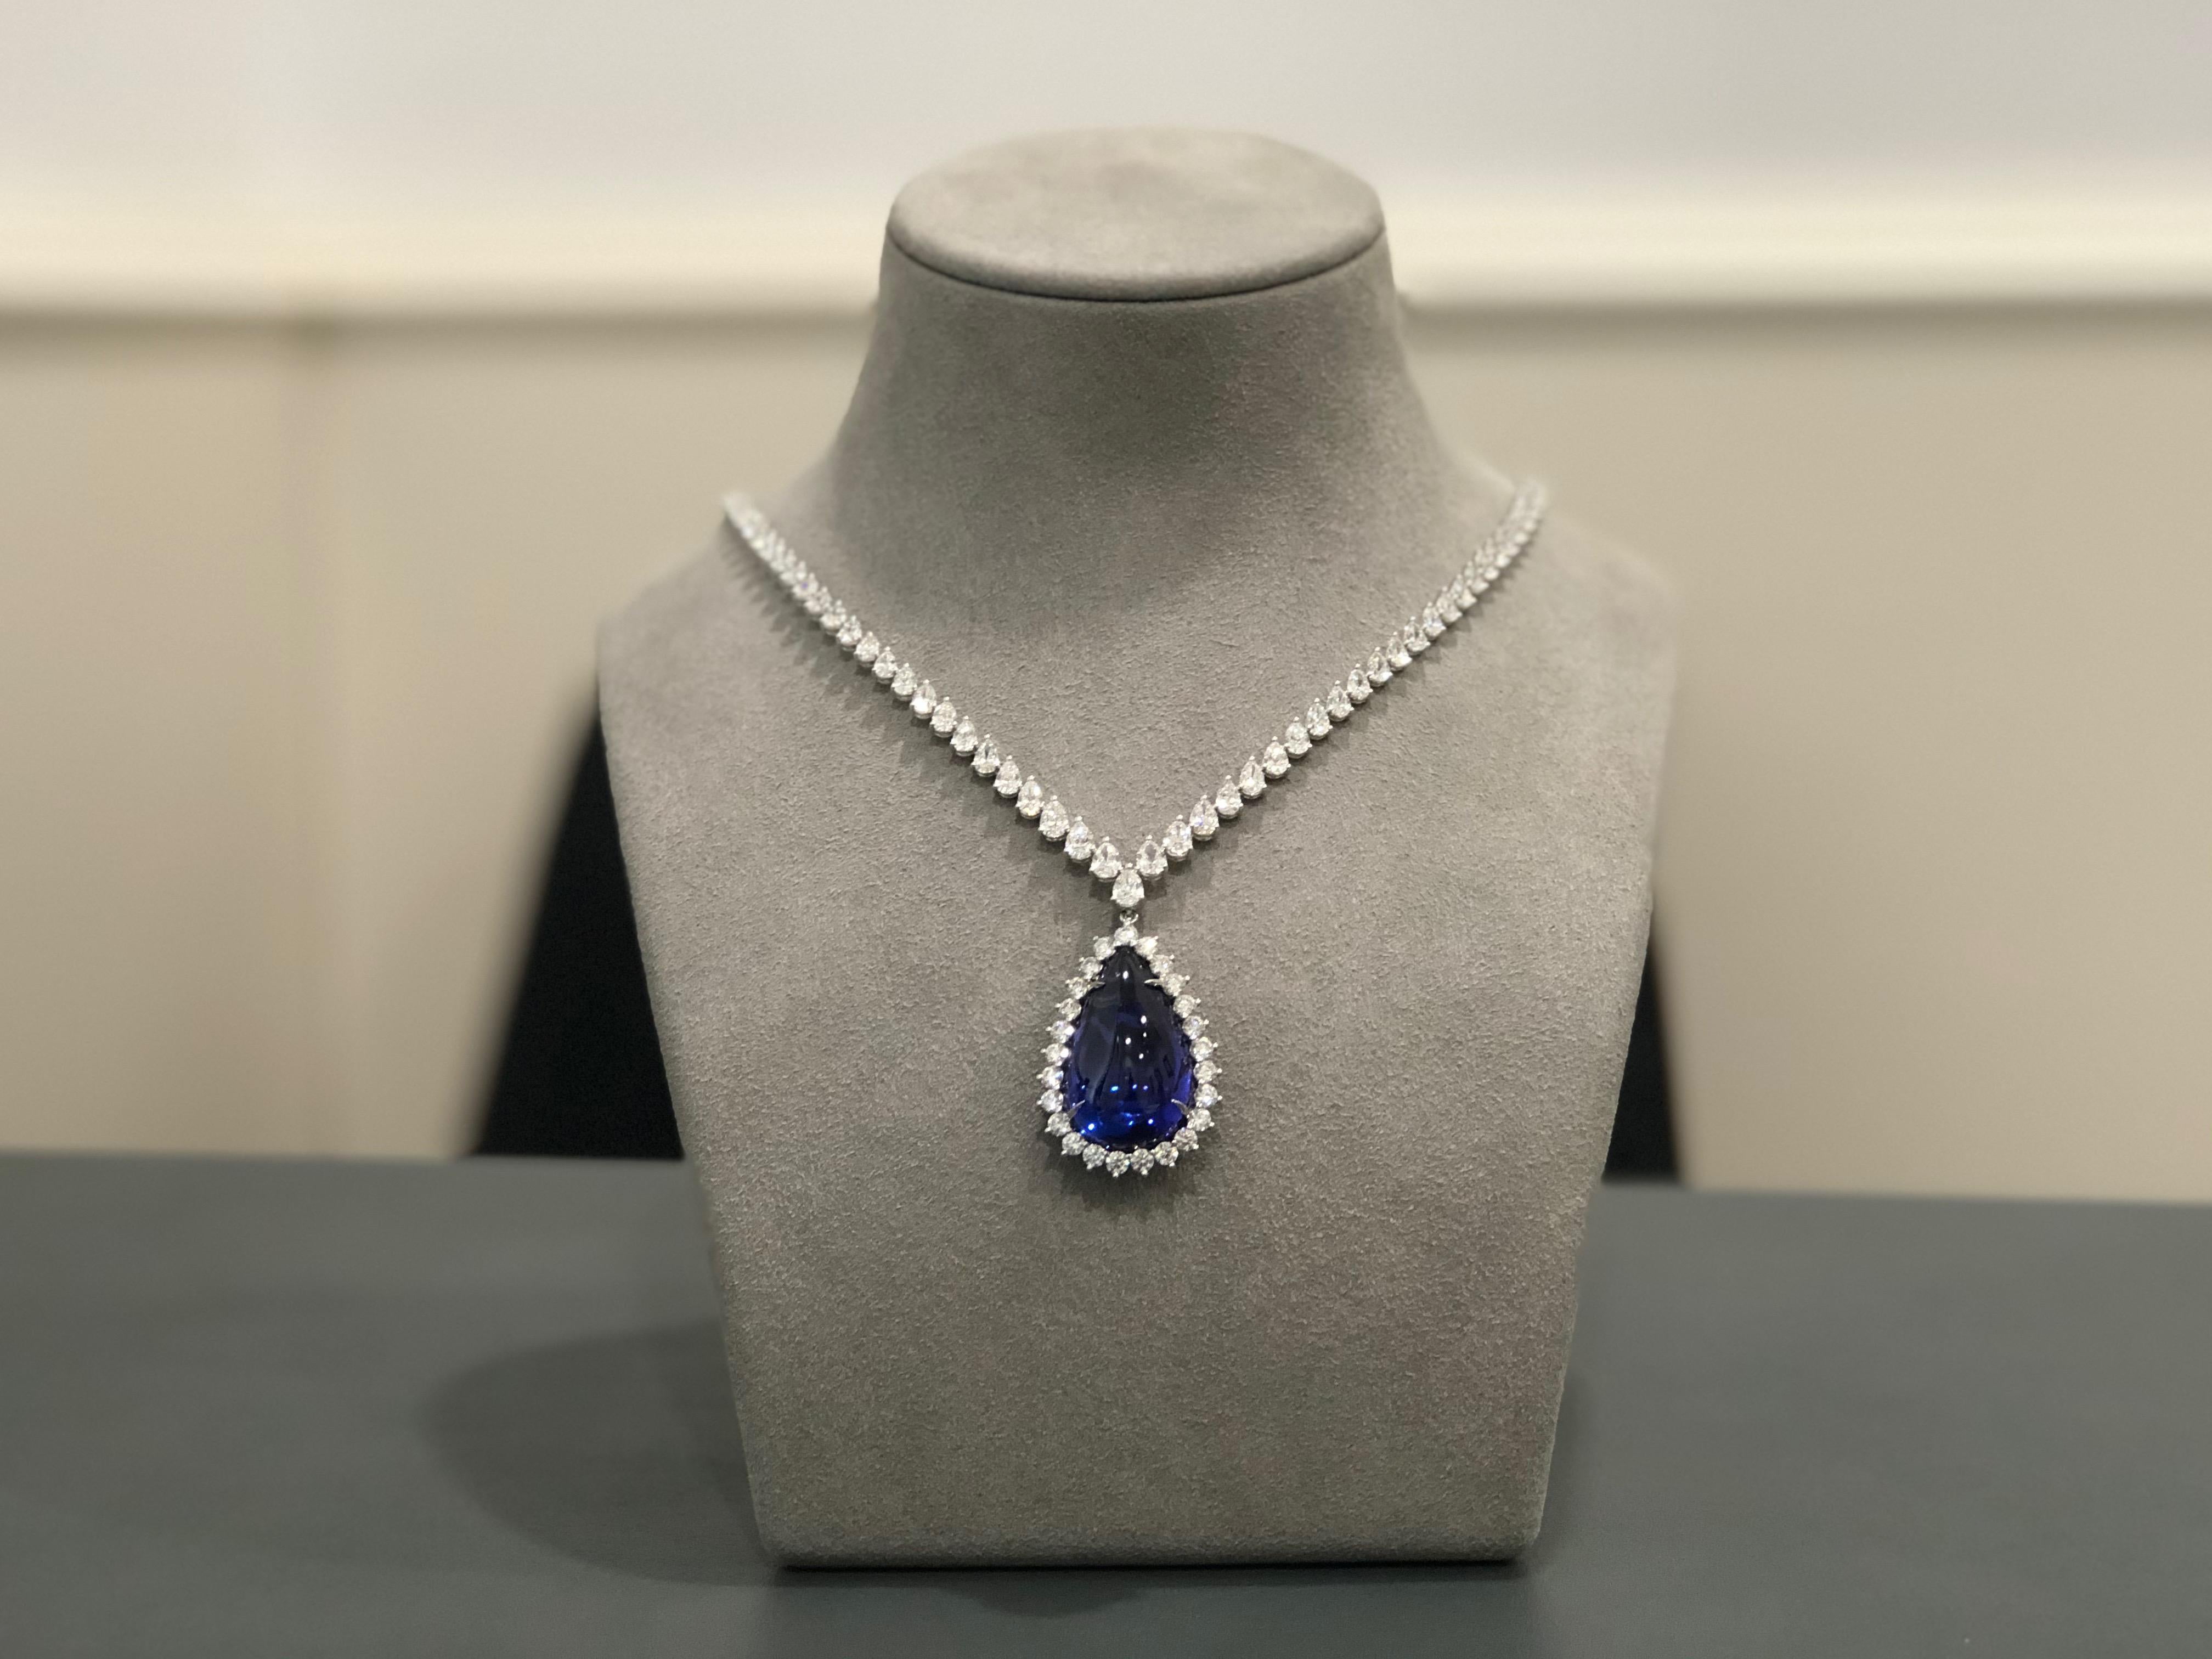 This very important and gorgeous pendant is set with a 40.91 carat pear shape blue cabochon tanzanite. The tanzanite is surrounded by 25 full cut round brilliant diamonds in a 3 prong style setting. The pendant is attached to a stunning diamond